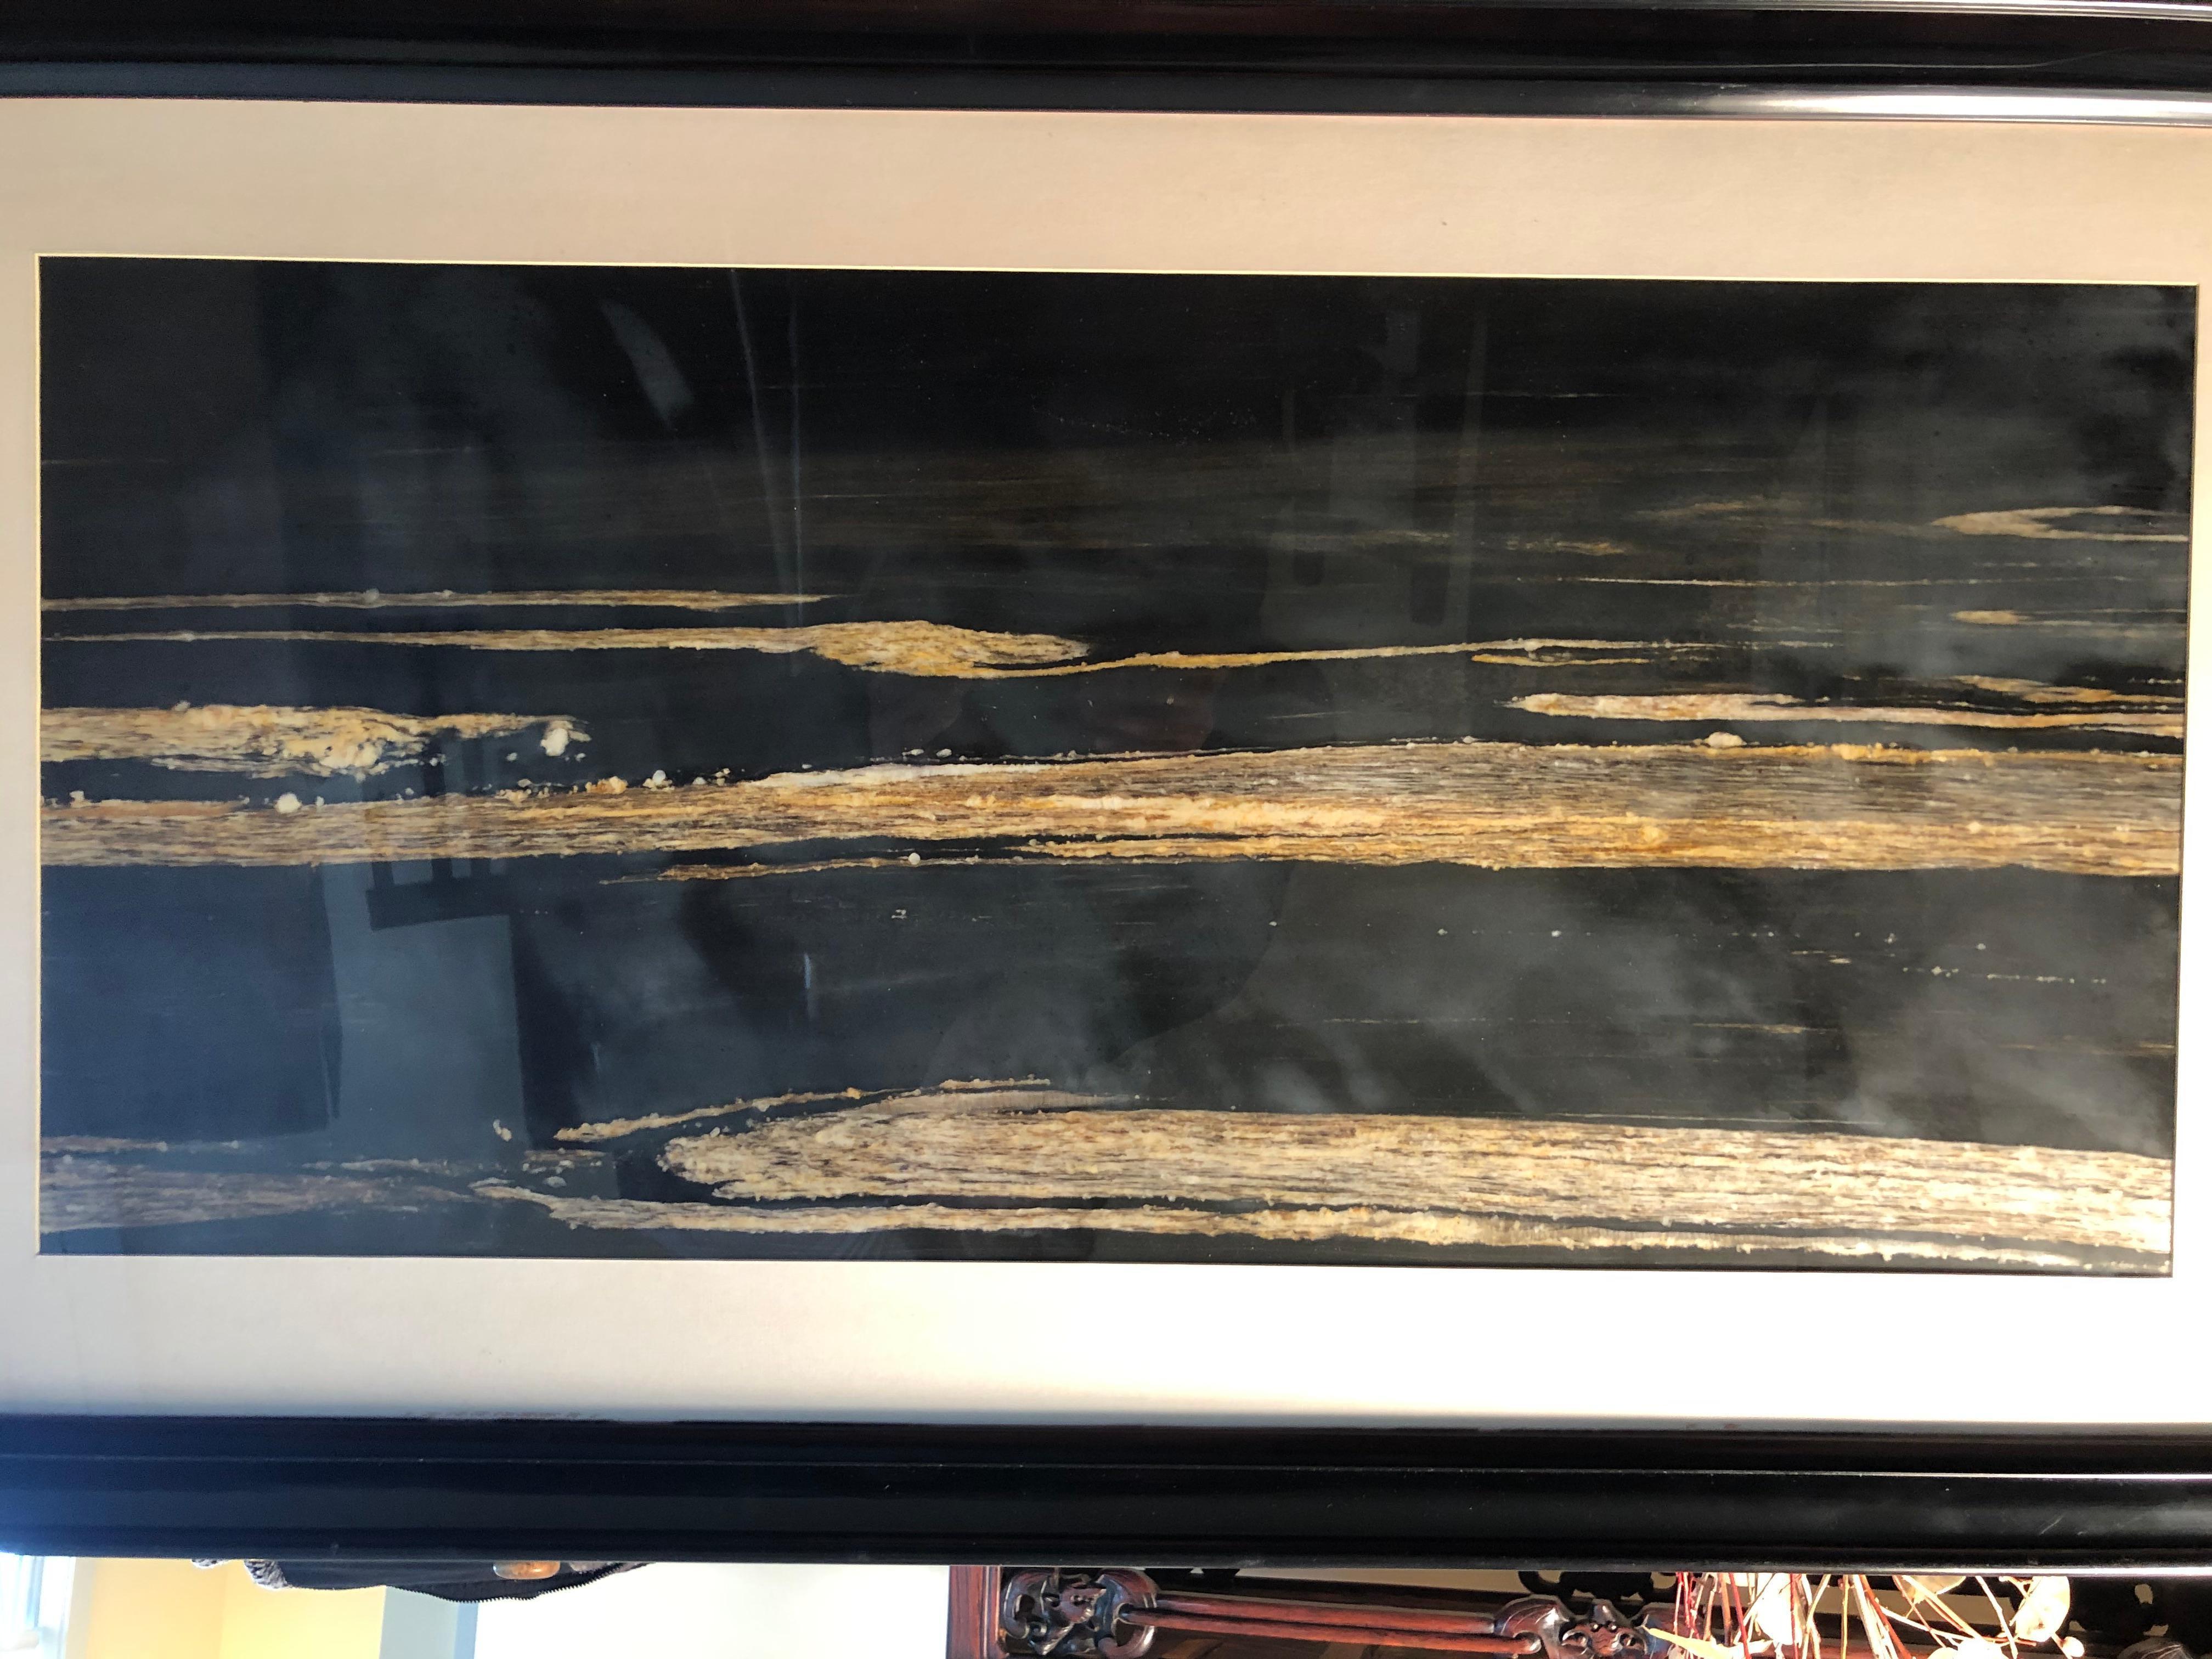 An extraordinary Natural Landscape work, one of a kind. Custom framed.

This Chinese extraordinary natural stone painting of cloud bands under a breath taking moon light reflectio could remind us of a similar and unique evening experience in our